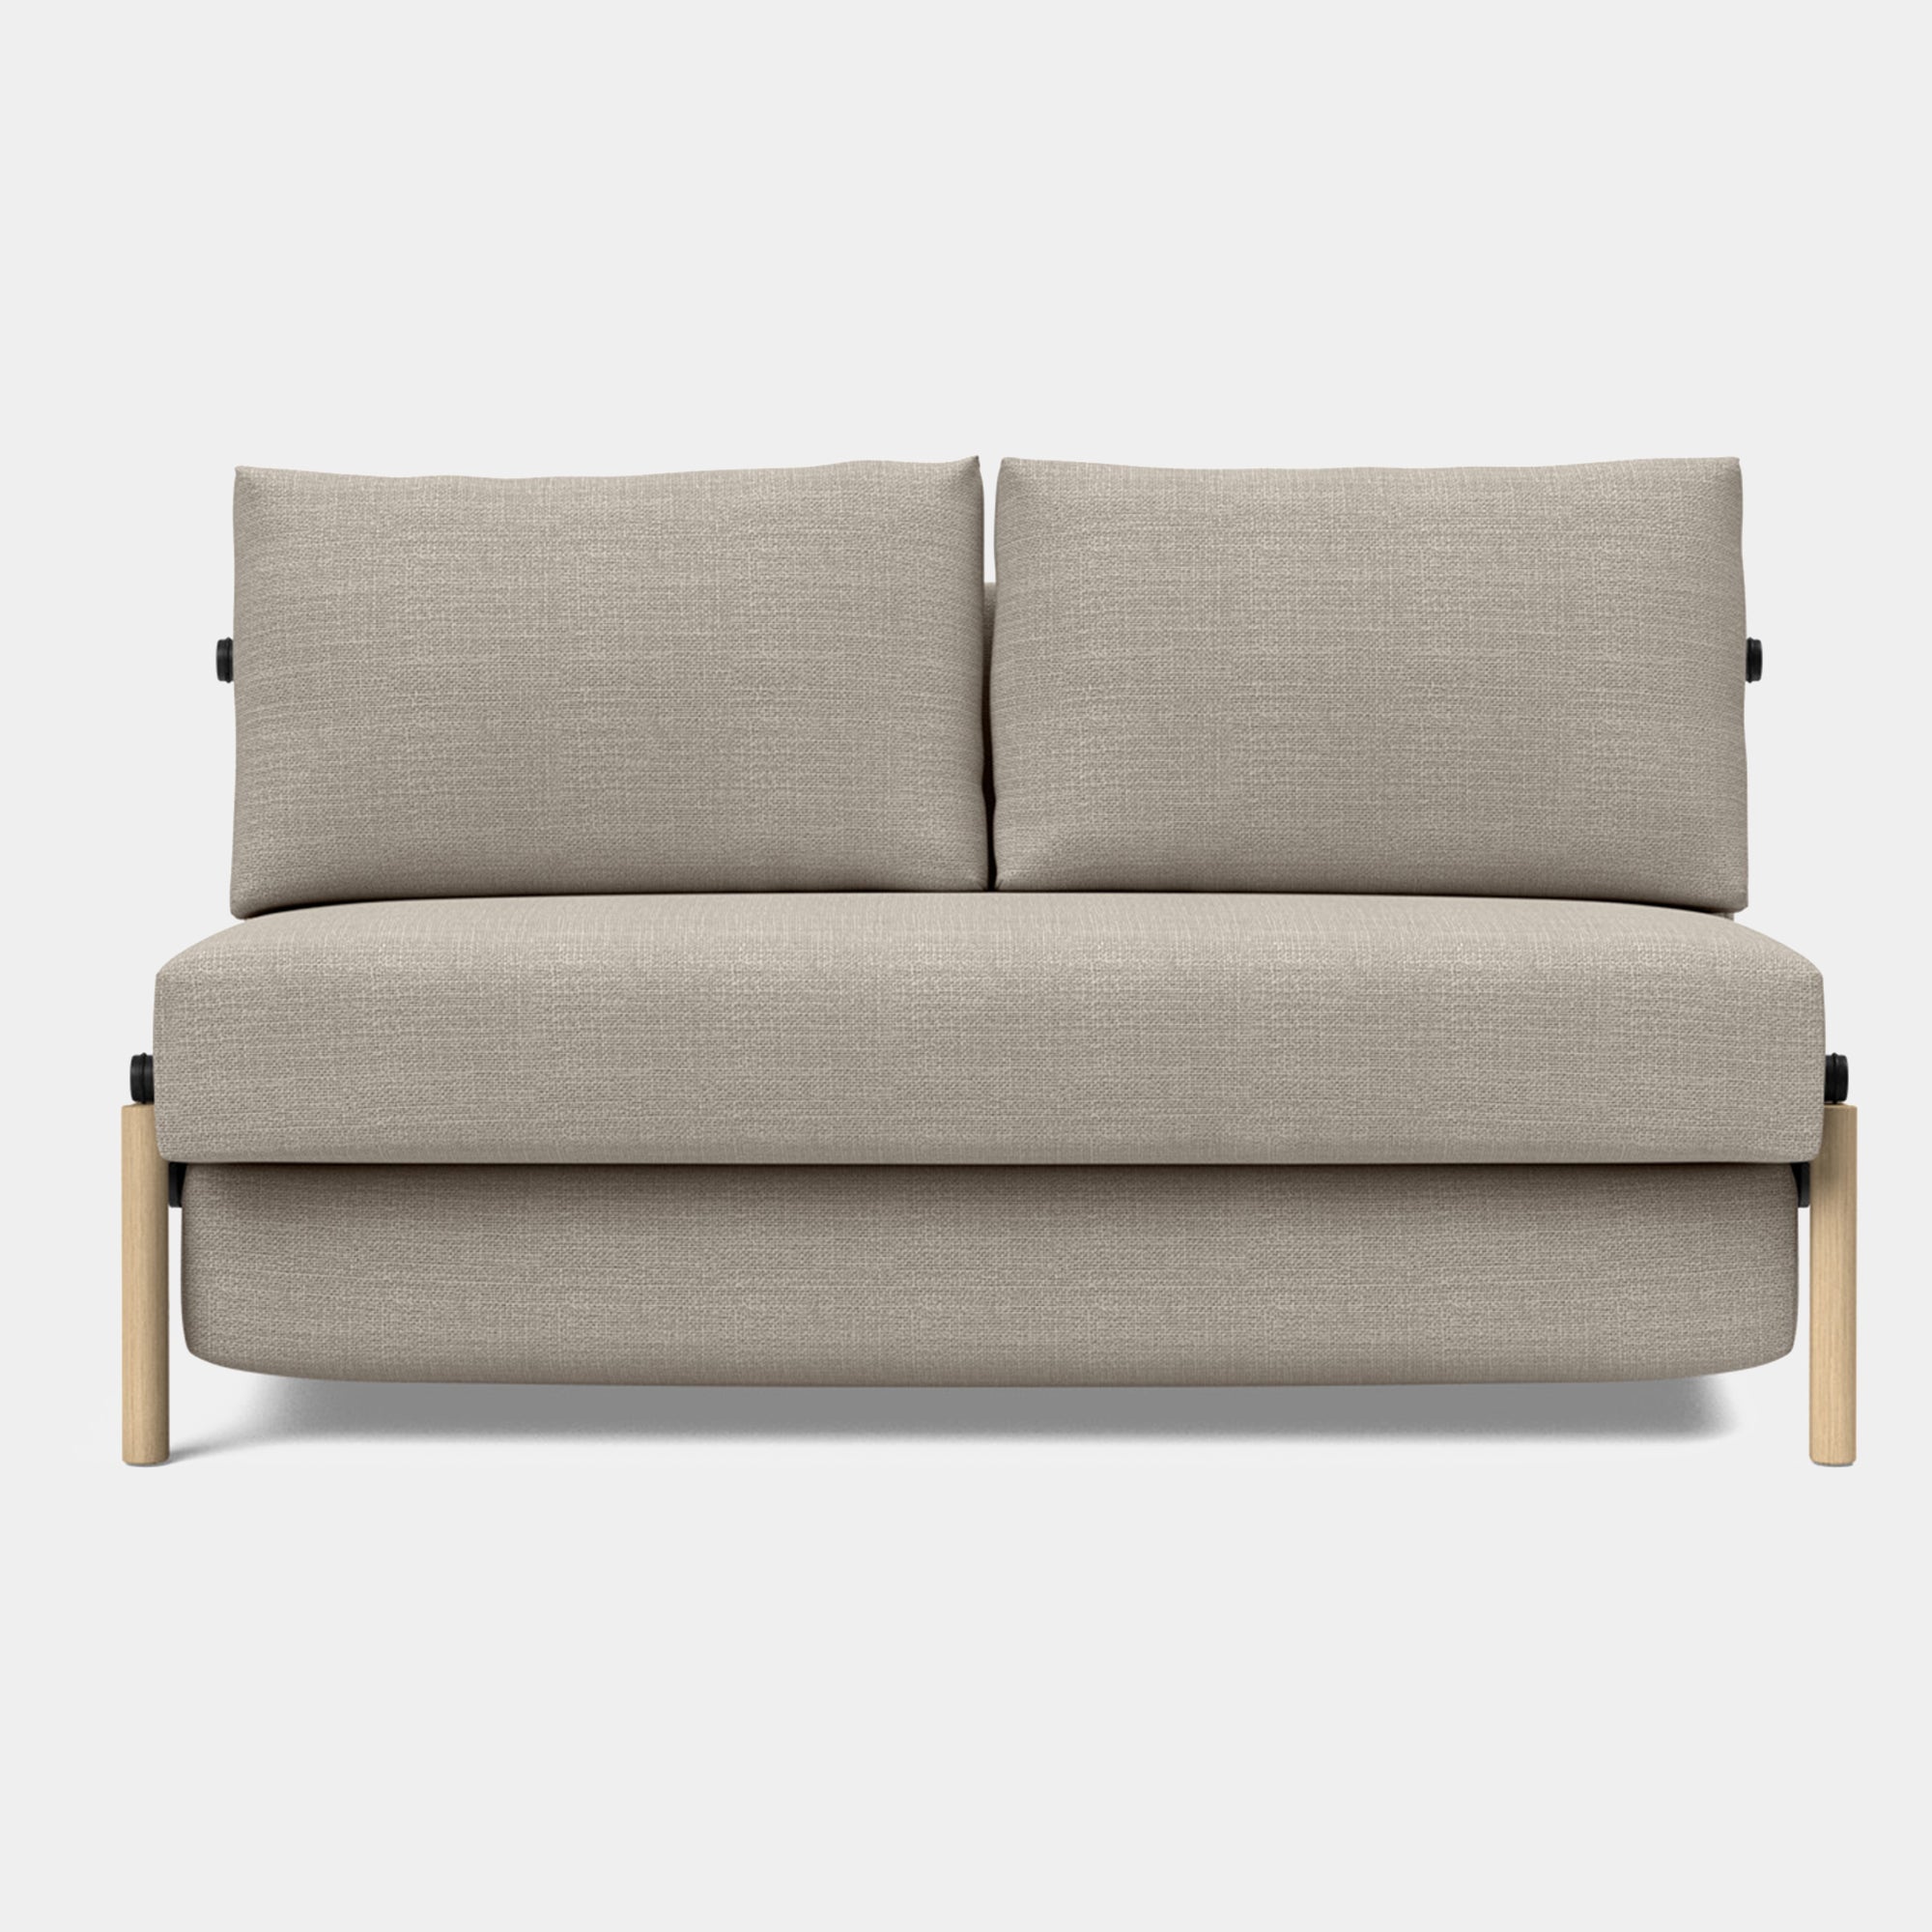 Scandi - Sofabed In Fabric 140cm